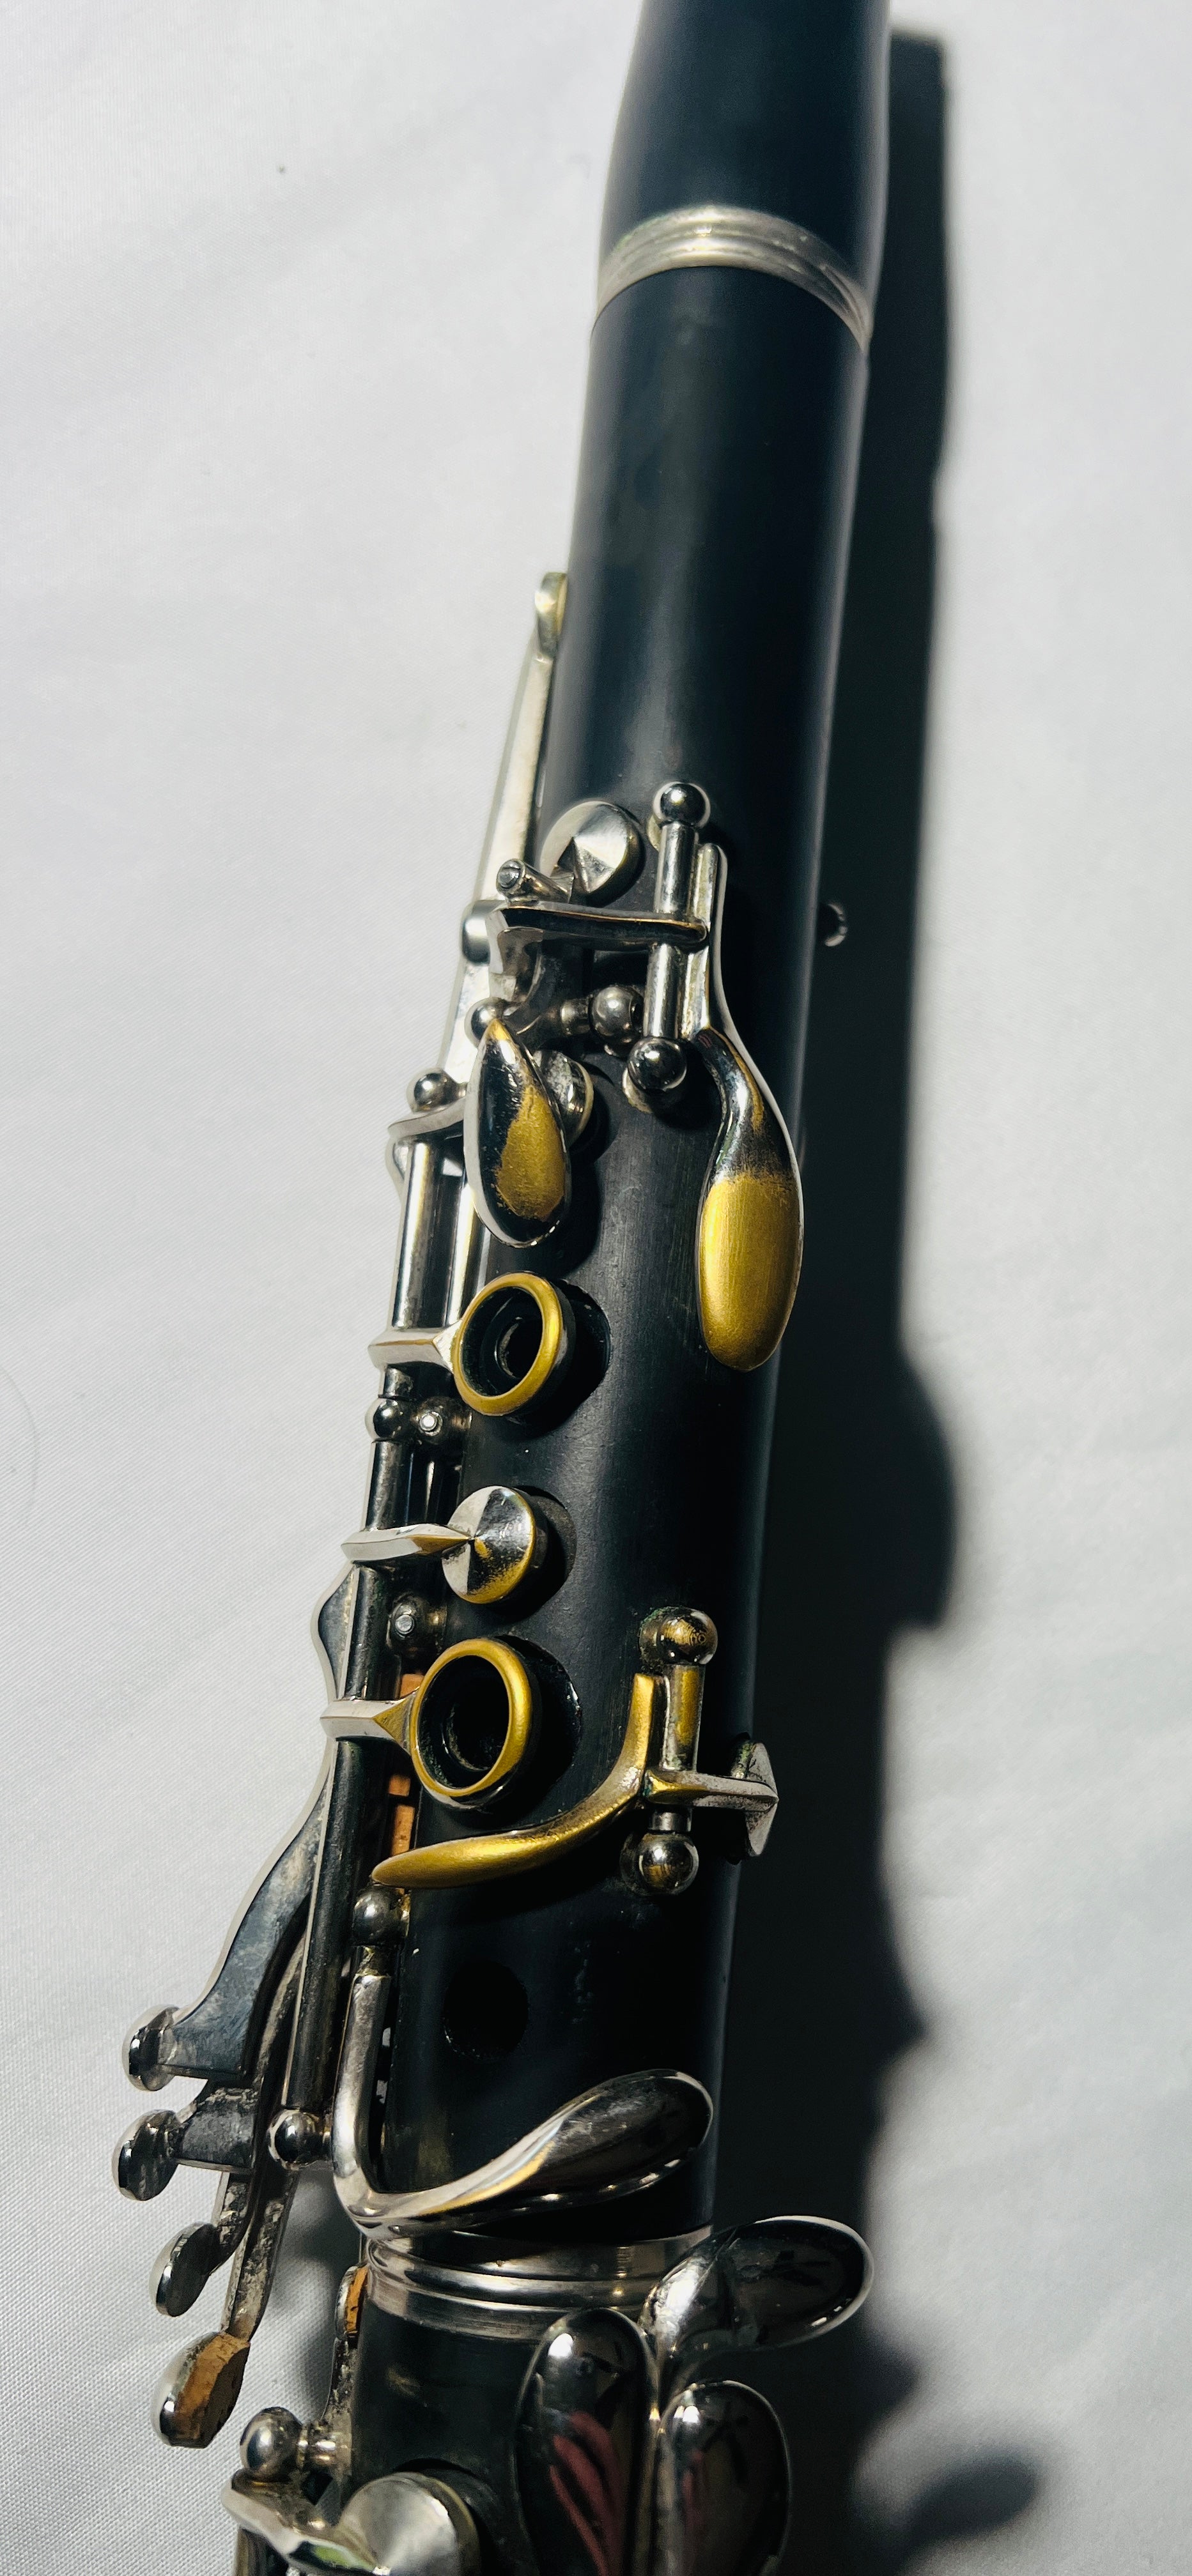 Jean Paul Clarinet Plastic Body Minor Tune Up AS IS USED